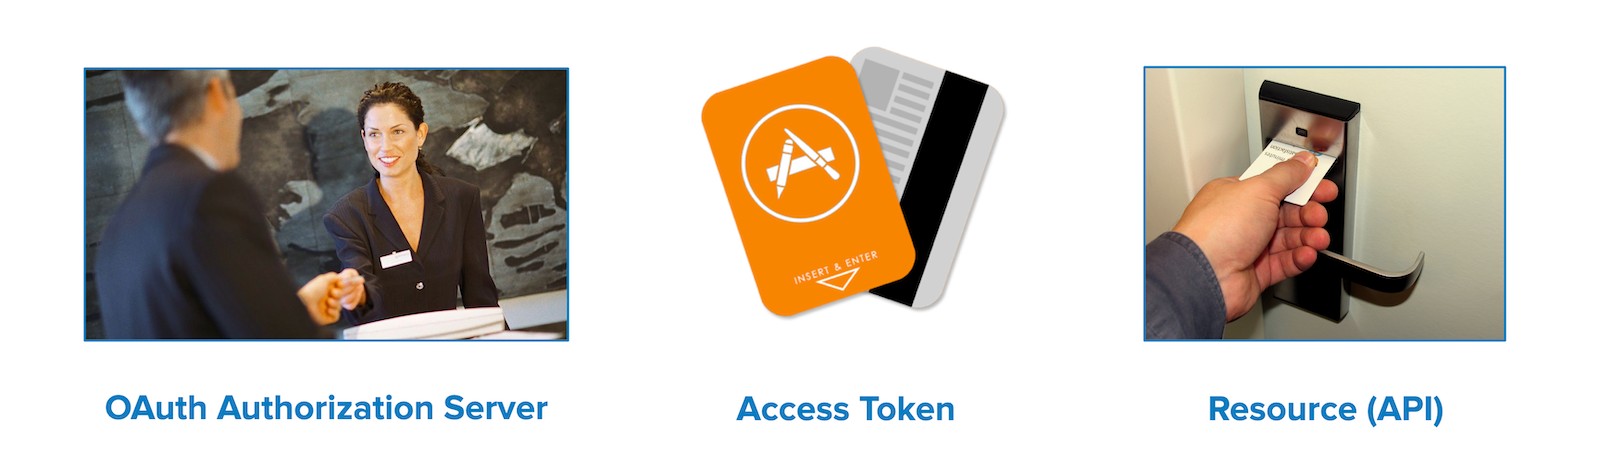 OAuth is Hotel key cards for apps